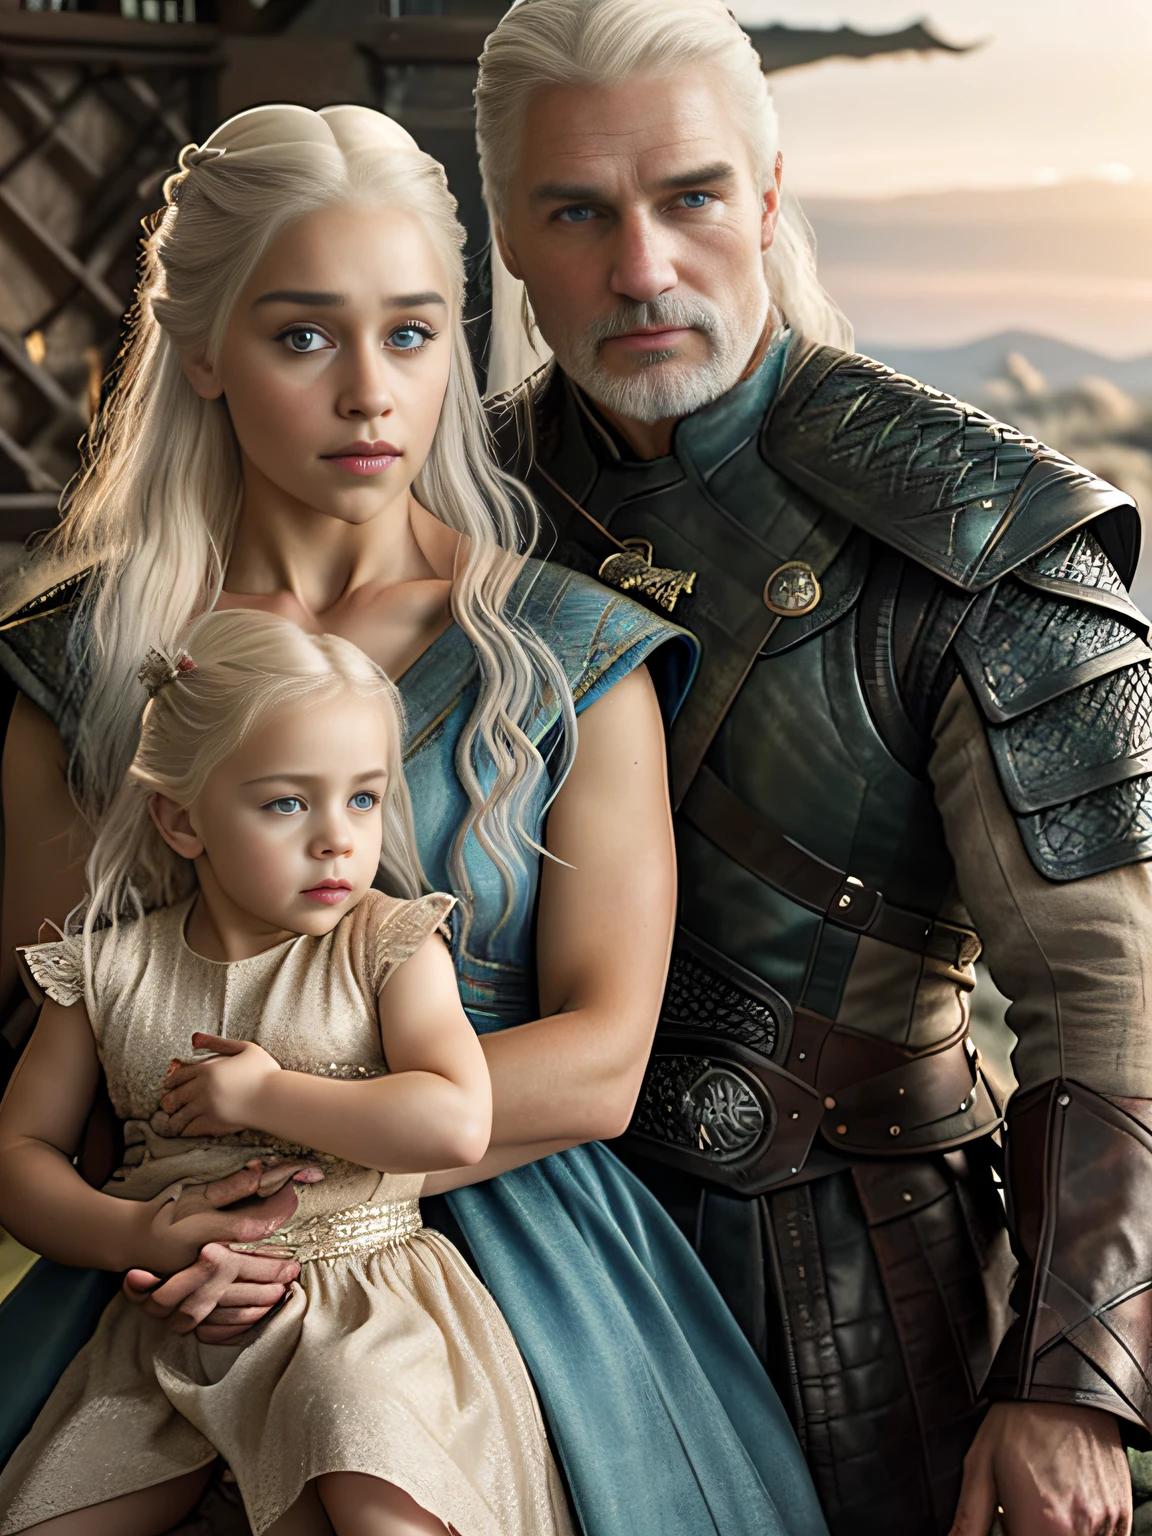 raw fullbody ((family photo of a father and mother with their daughter beautiful)), 1girl, [daenerys targaryen|Emilia Clarke], (1man, Henry Cavill as Geralt de Rivia The Witcher), playing with their ((5 year old daughter)))), medieval clothing,((half body shot)), realistic proportions, realistic pupils, ((3 member family portrait)) limited palette, highres, cinematic lighting, 8k resolution, front lit, sunrise, RAW photo, Nikon 85mm, Award Winning, Glamour Photograph, extremely detailed, beautiful Ukrainian, mind-bending, Noth-Yidik, raw fullbody photo of Daenerys Targaryen and Geralt de Rivia The Witcher with 5 year old daughter, highly detailed, artstation, smooth, sharp focus, 8K,, trending on instagram, trending on tumblr, hdr 4k, 8k